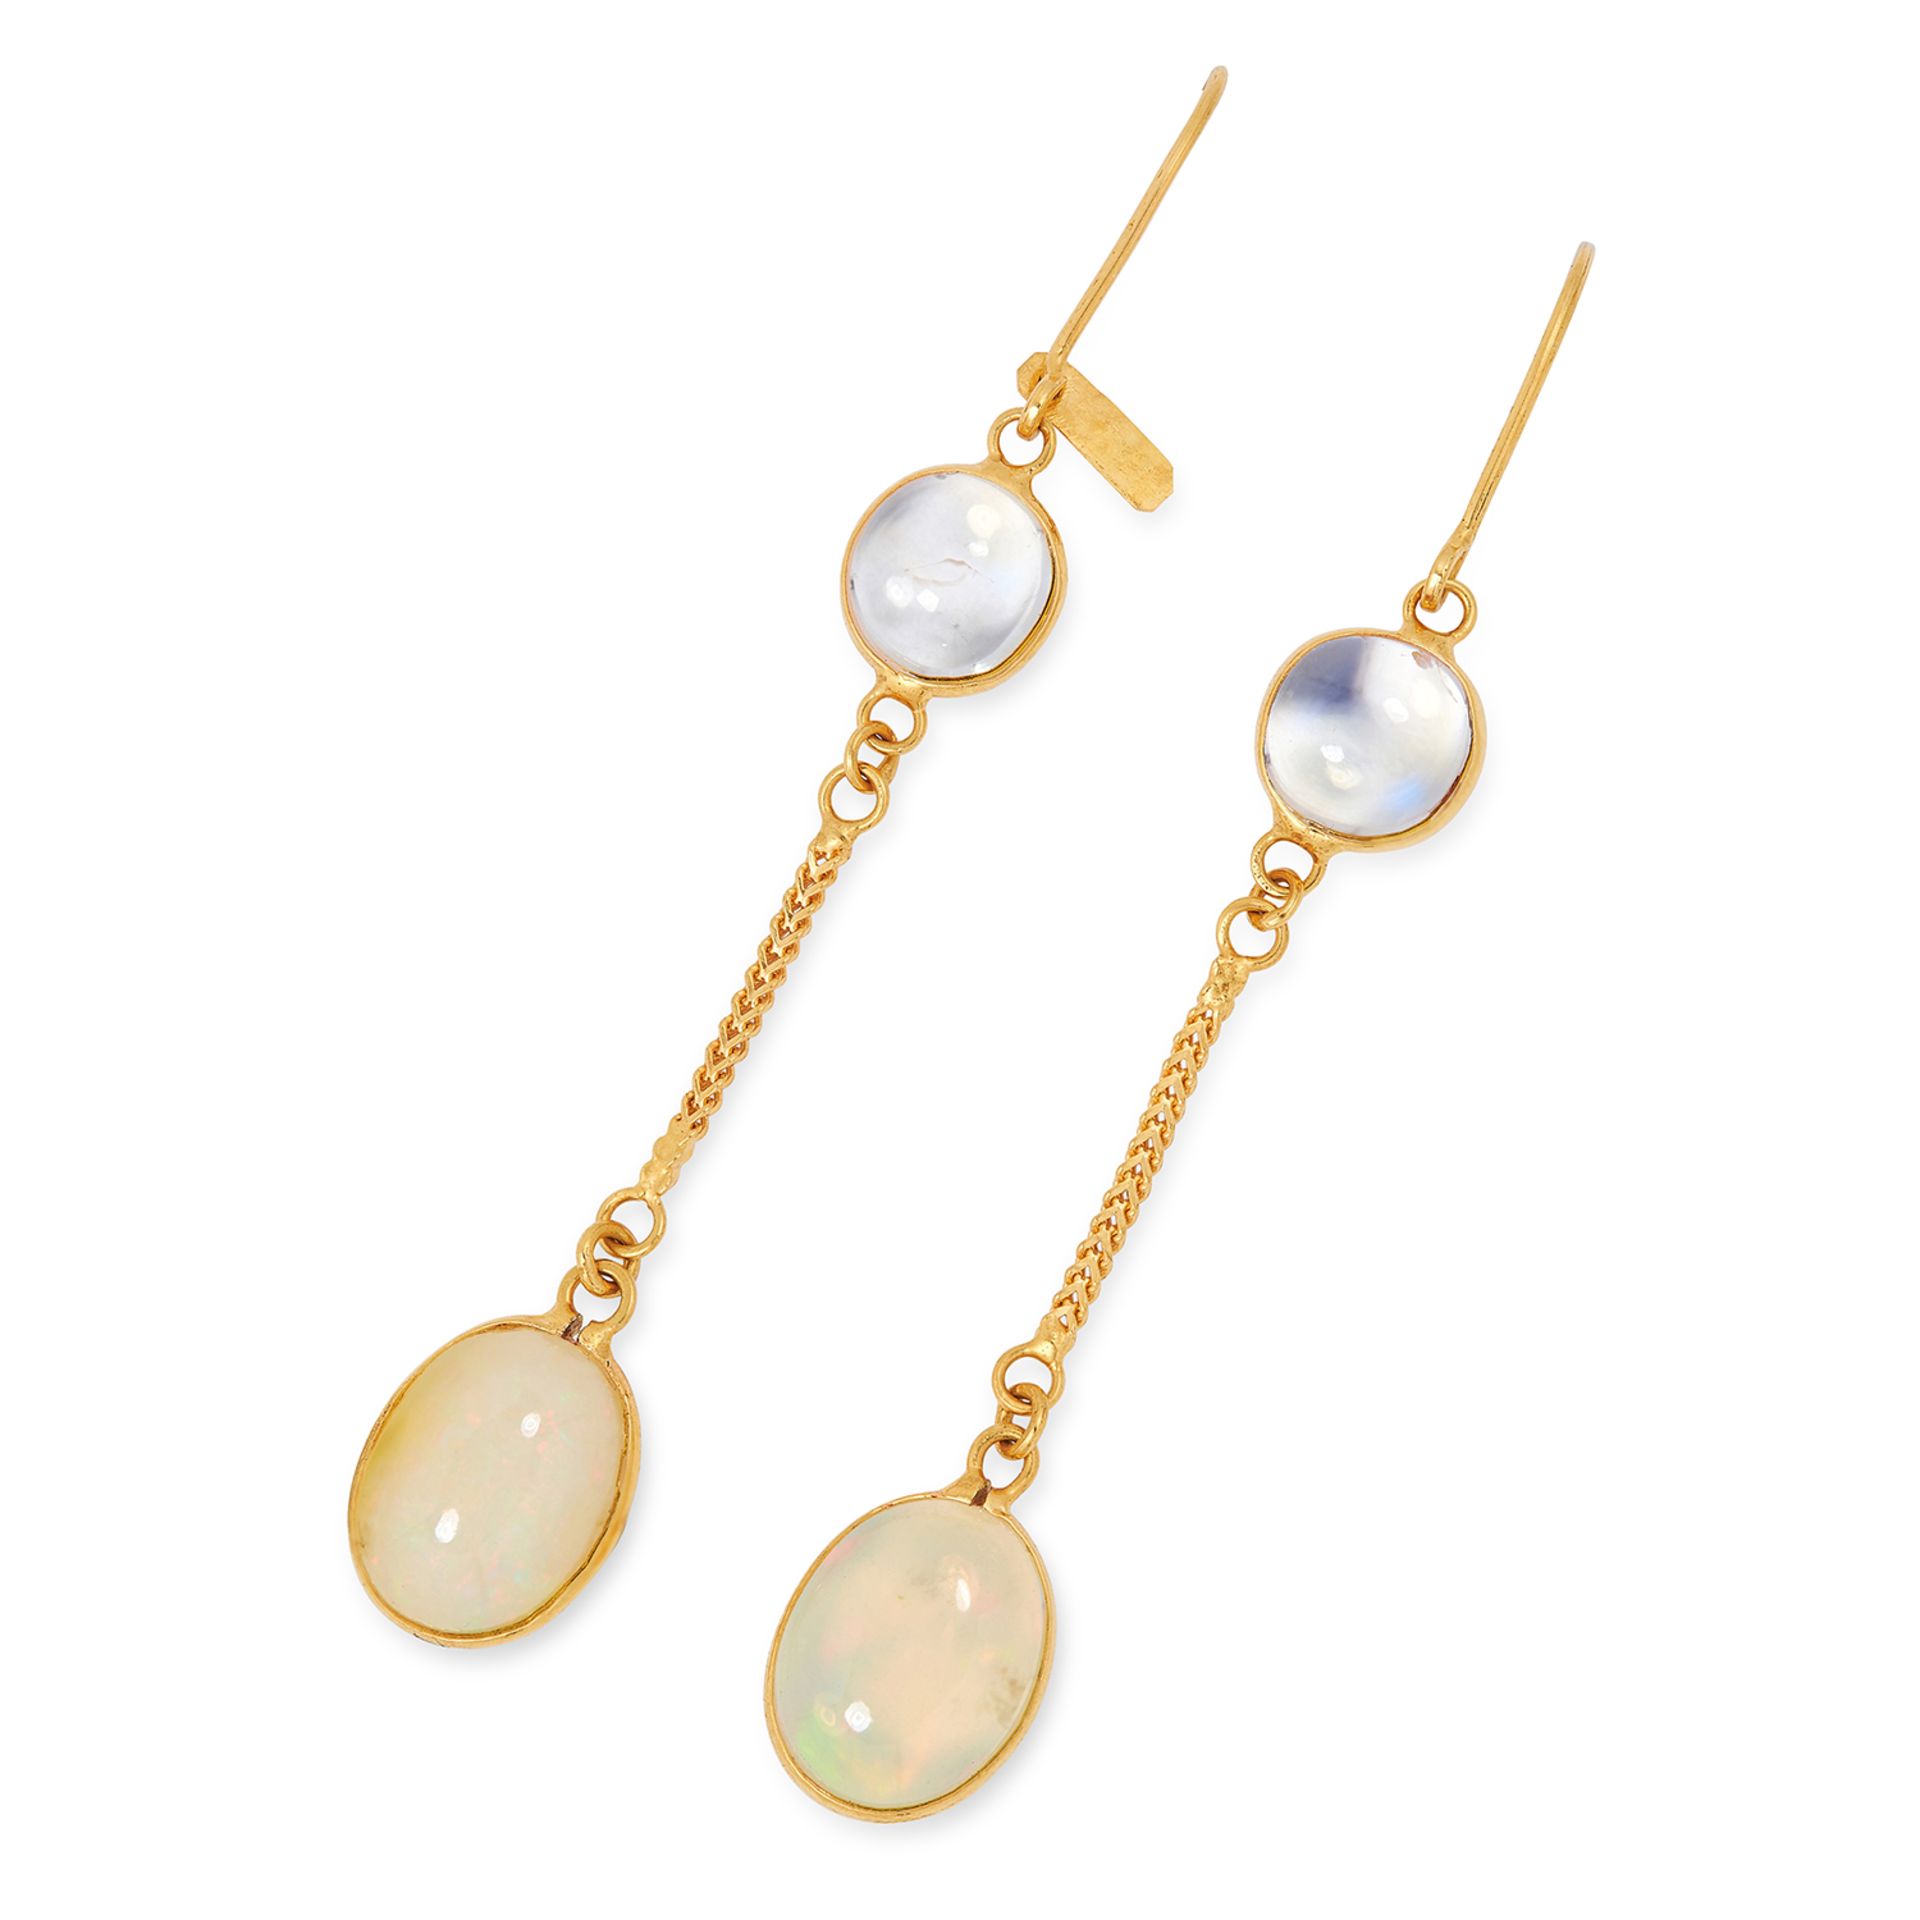 MOONSTONE AND OPAL DROP EARRINGS each set with a cabochon moonstone and opal, 4.9cm, 1.5g.